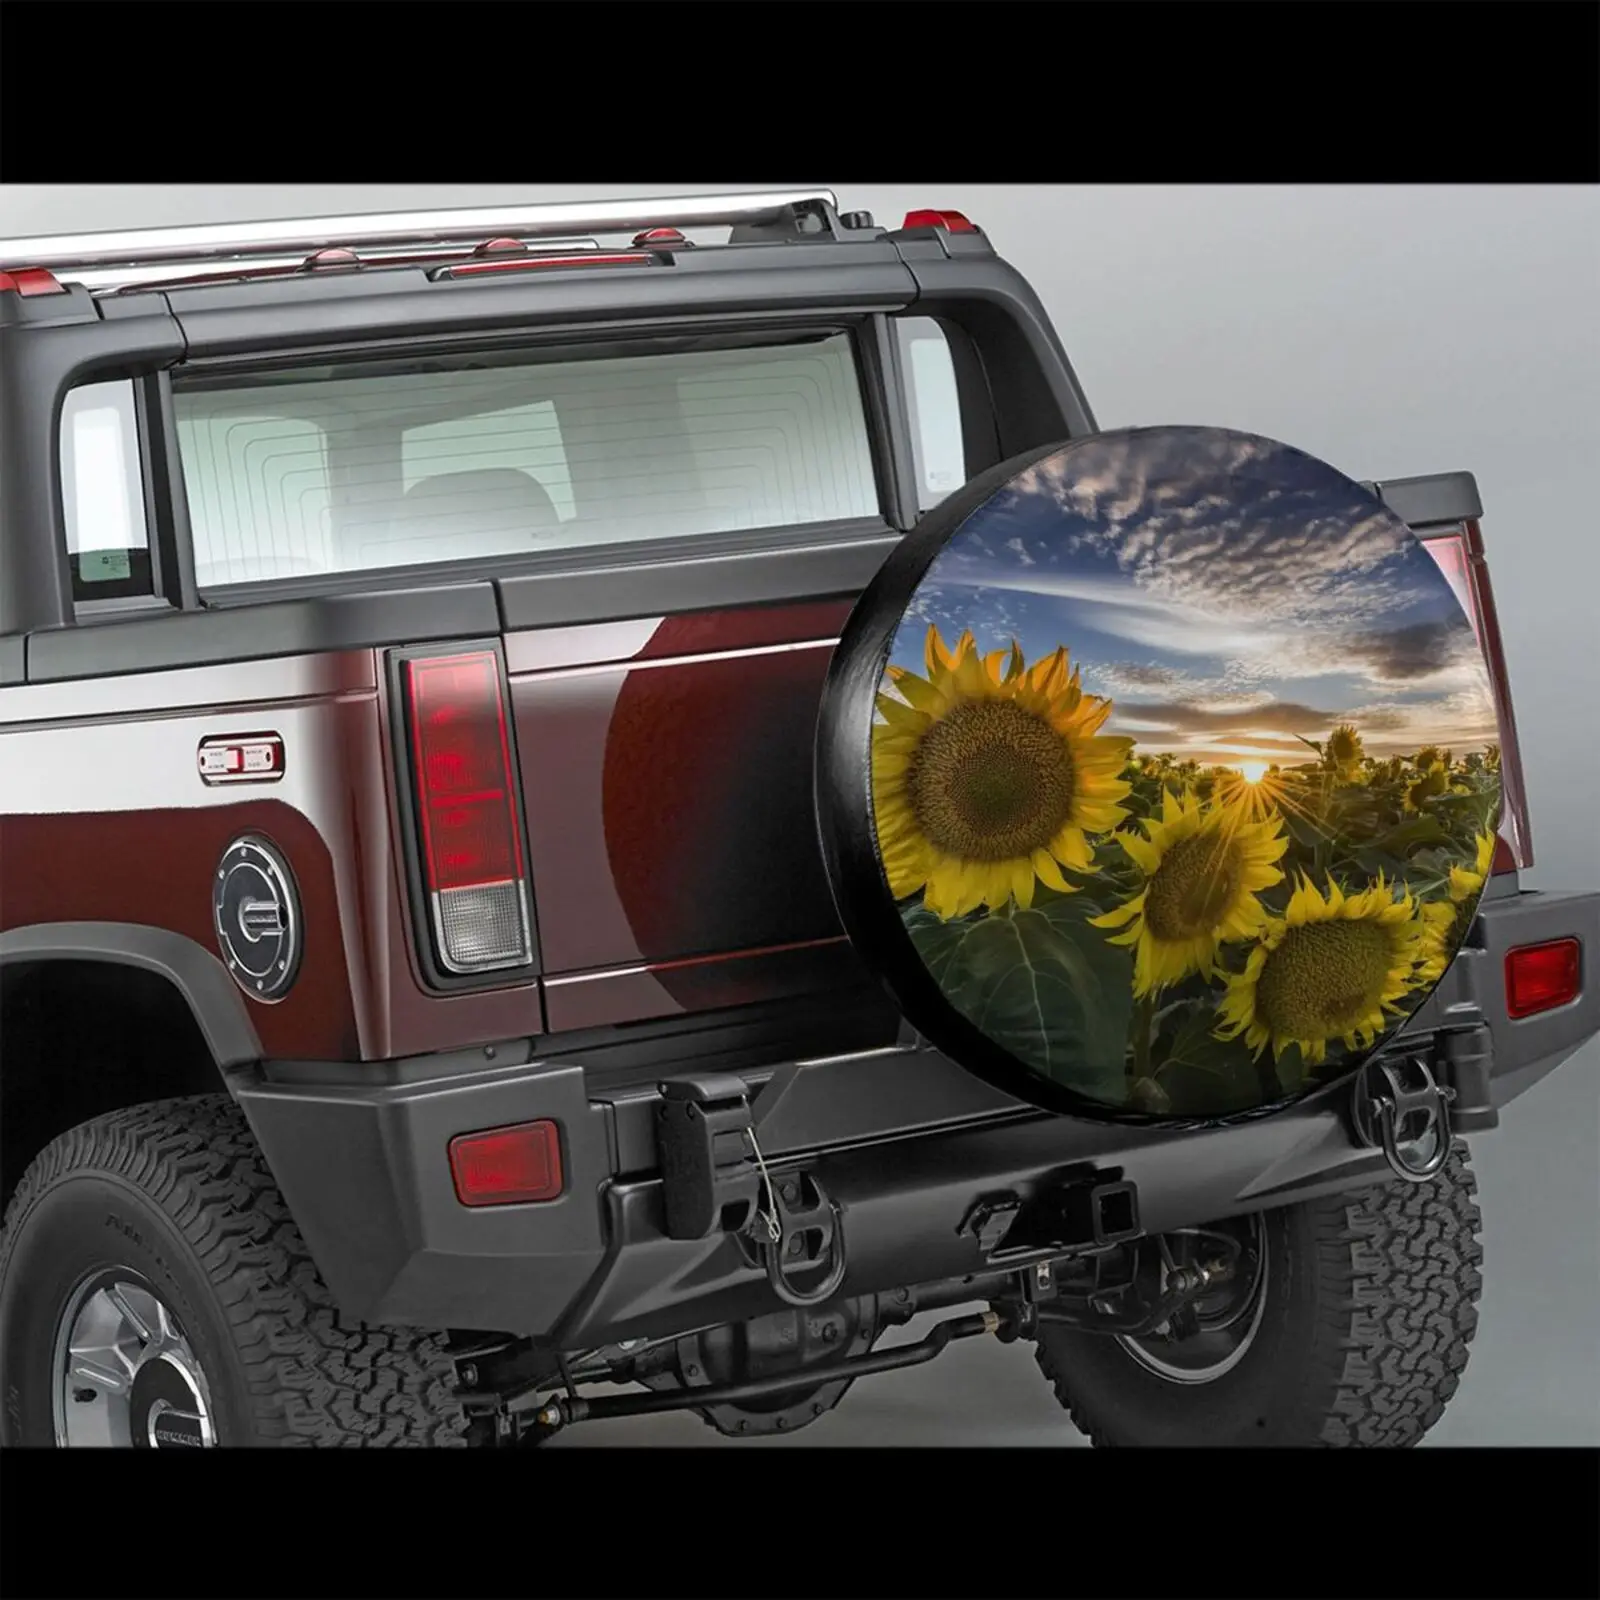 

Car Accessories Sunflower Landscape Design Tire Cover Universal Fits Most Cars for SUV Van Vehicle